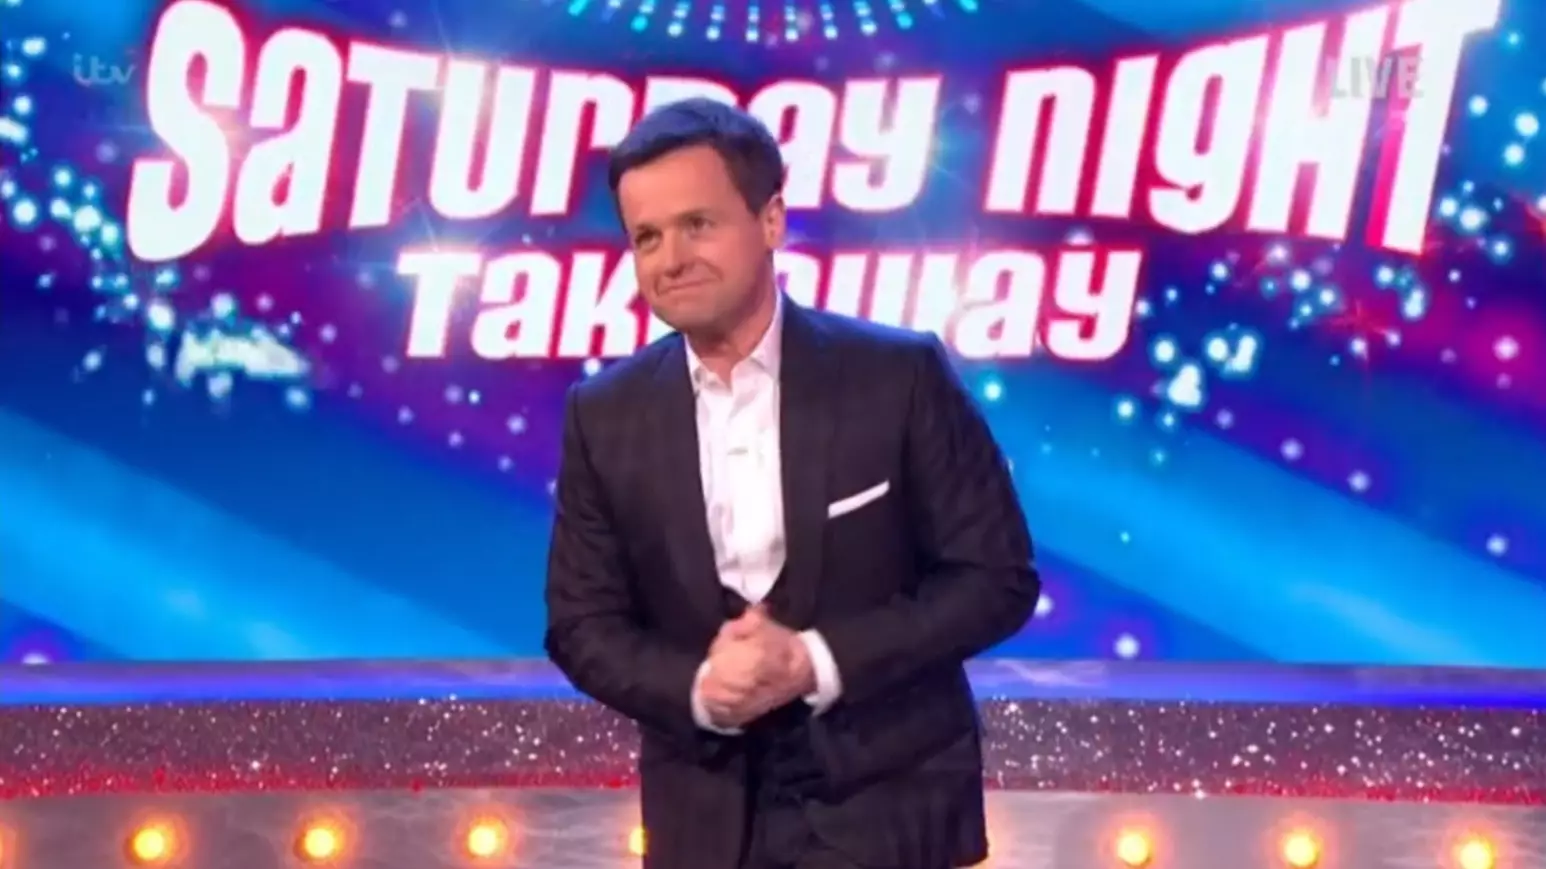 Declan Donnelly Gets Standing Ovation After Presenting 'Saturday Night Takeaway' Alone